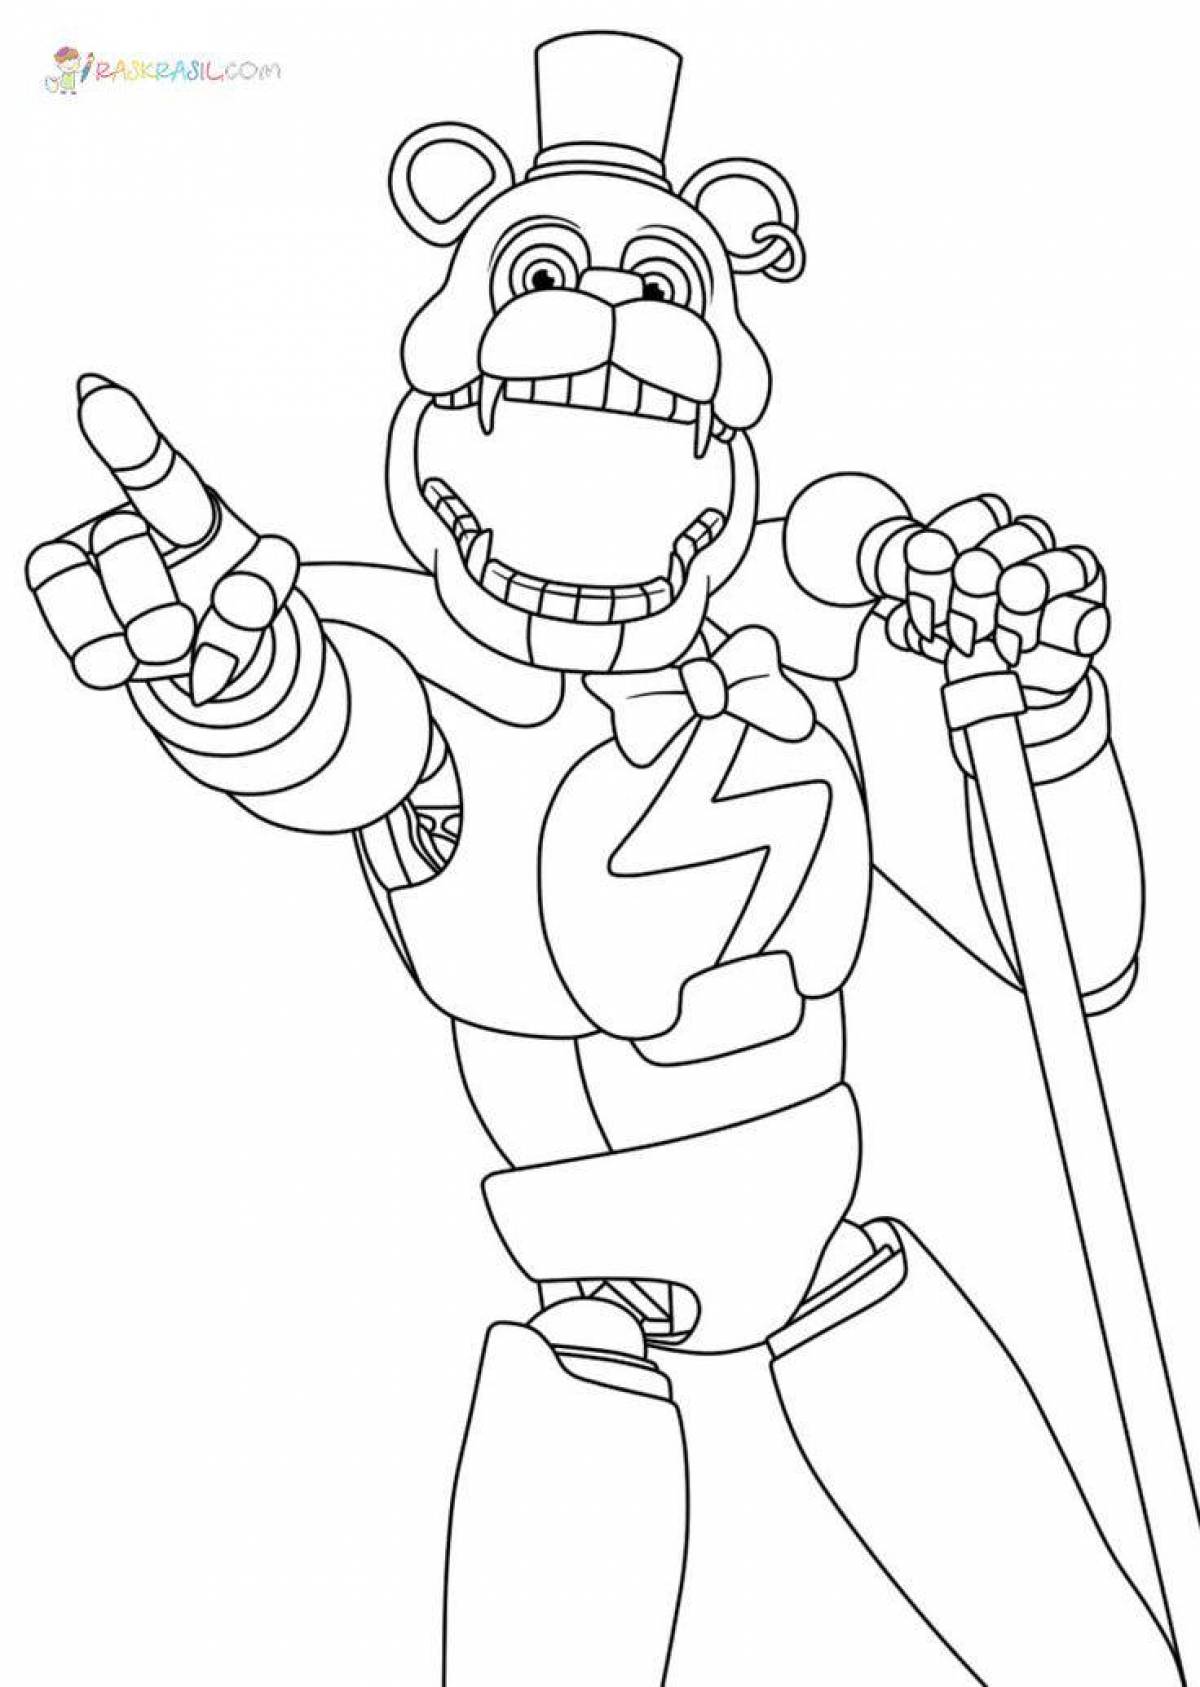 Colorful animatronics coloring page for everyone